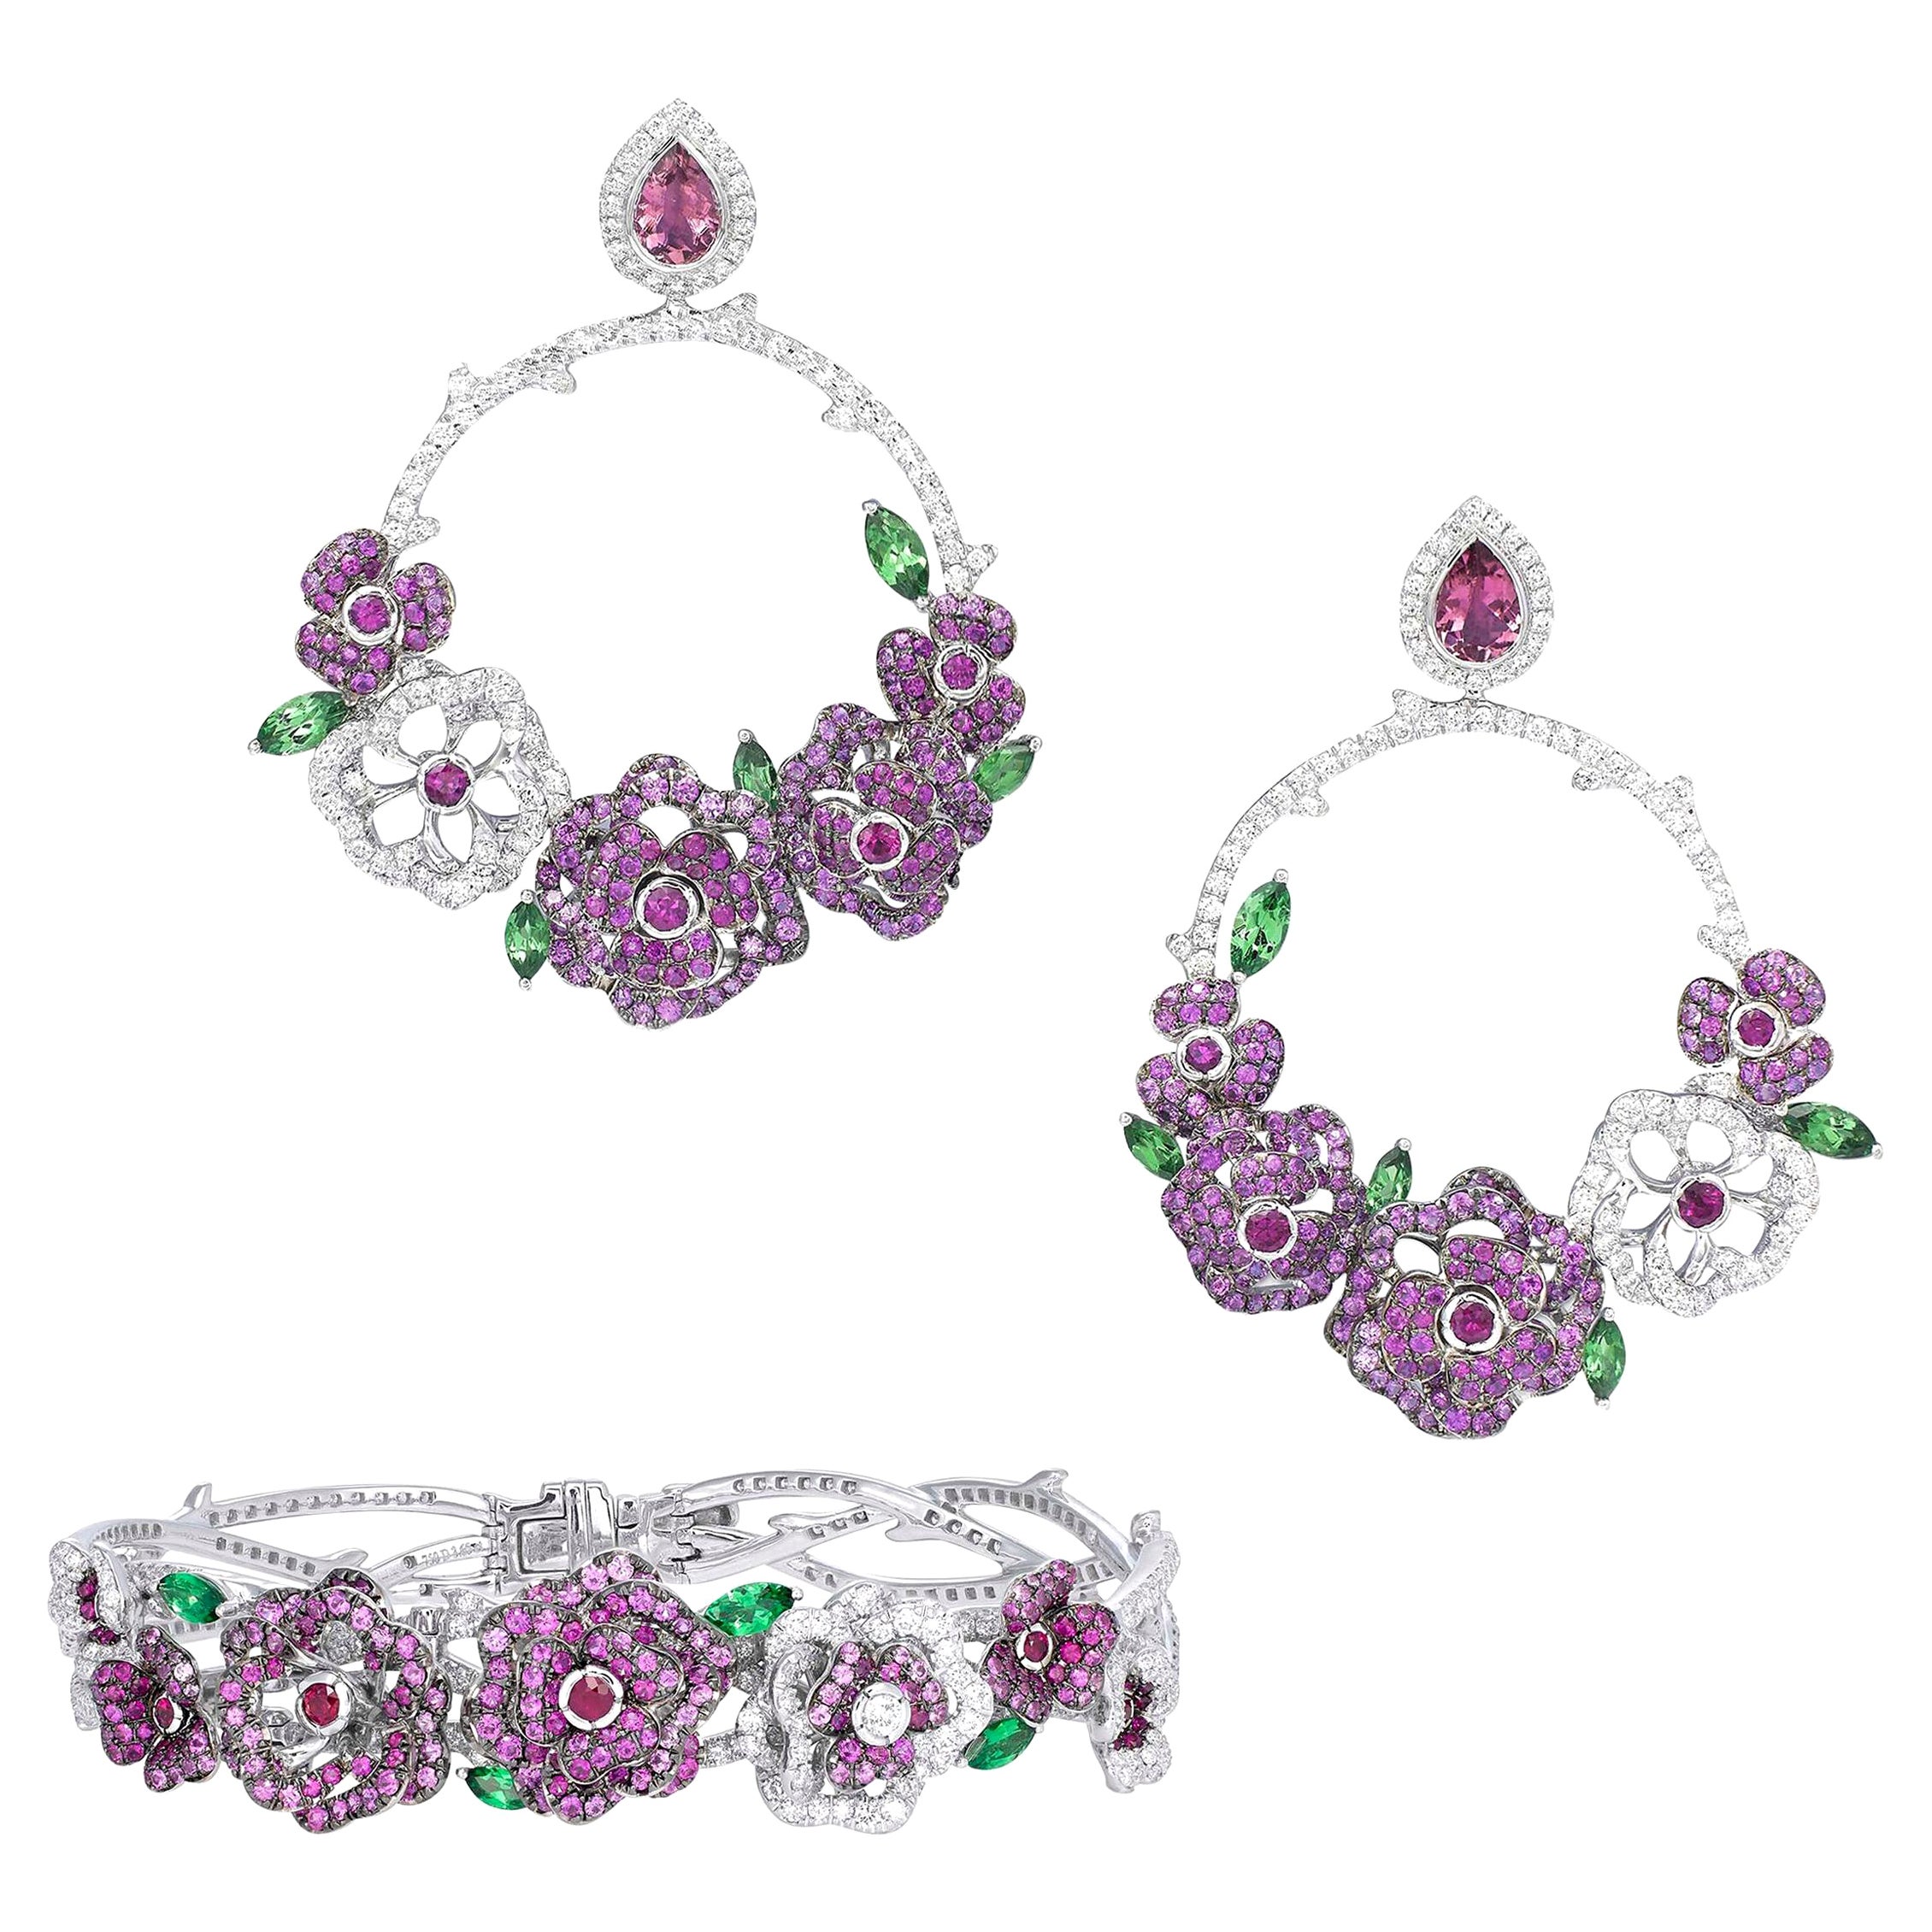 18 Karat White Gold, Diamonds, Pink Sapphires and Rubies Earrings and Bracelet For Sale